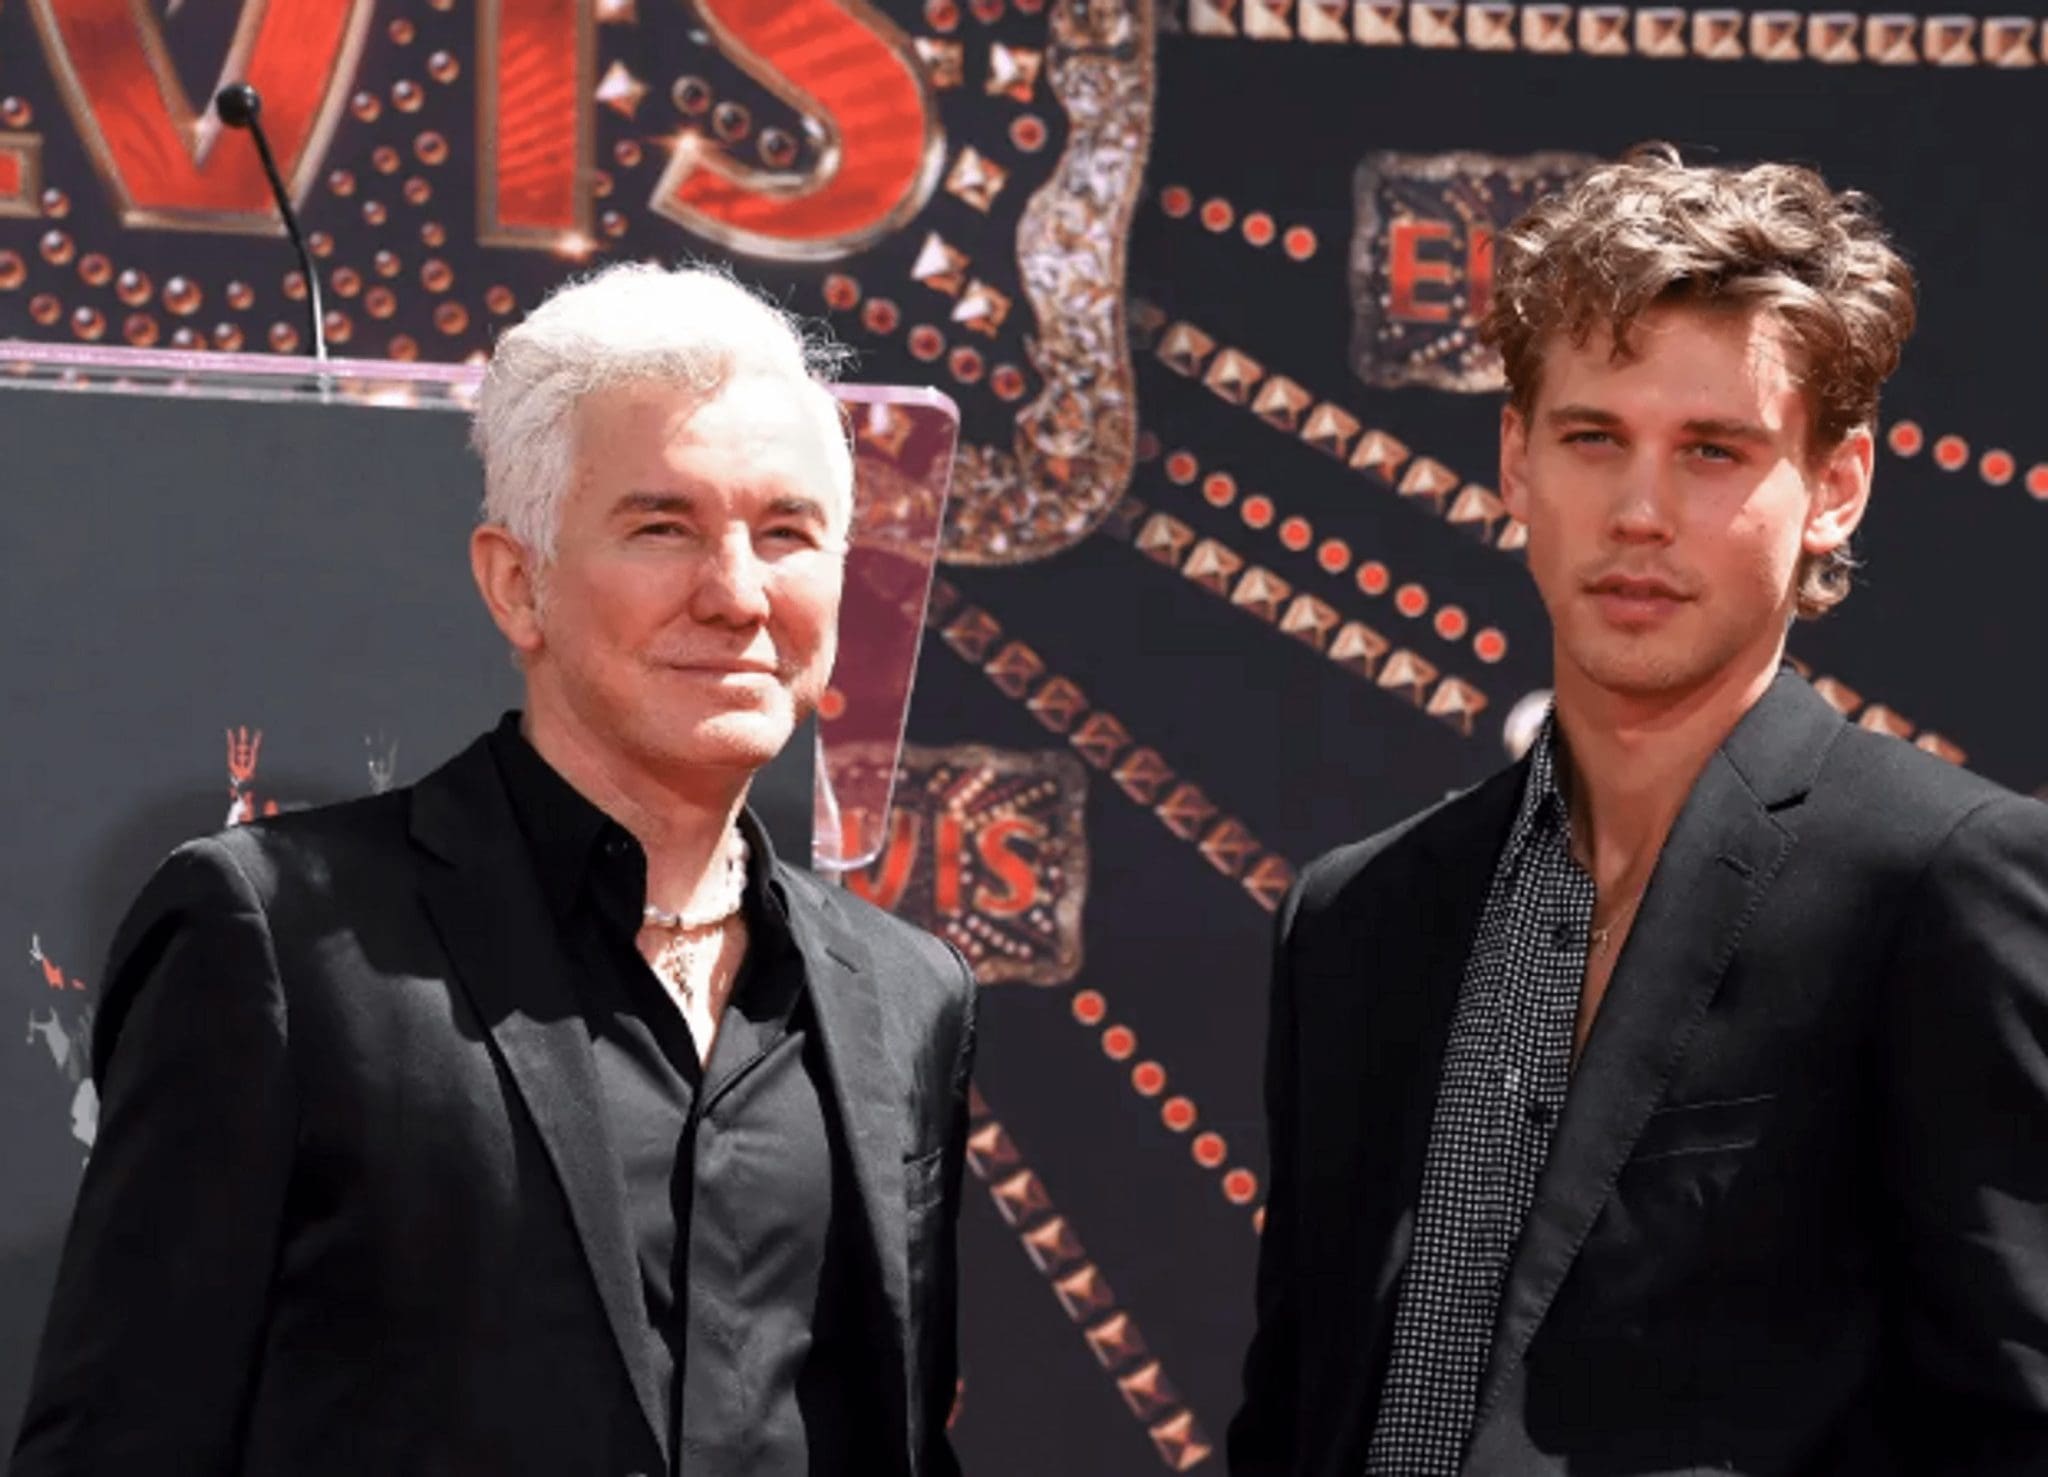 After Being Booed By Baz Luhrmann And Executives, Austin Butler Sobbed As He Returned Home